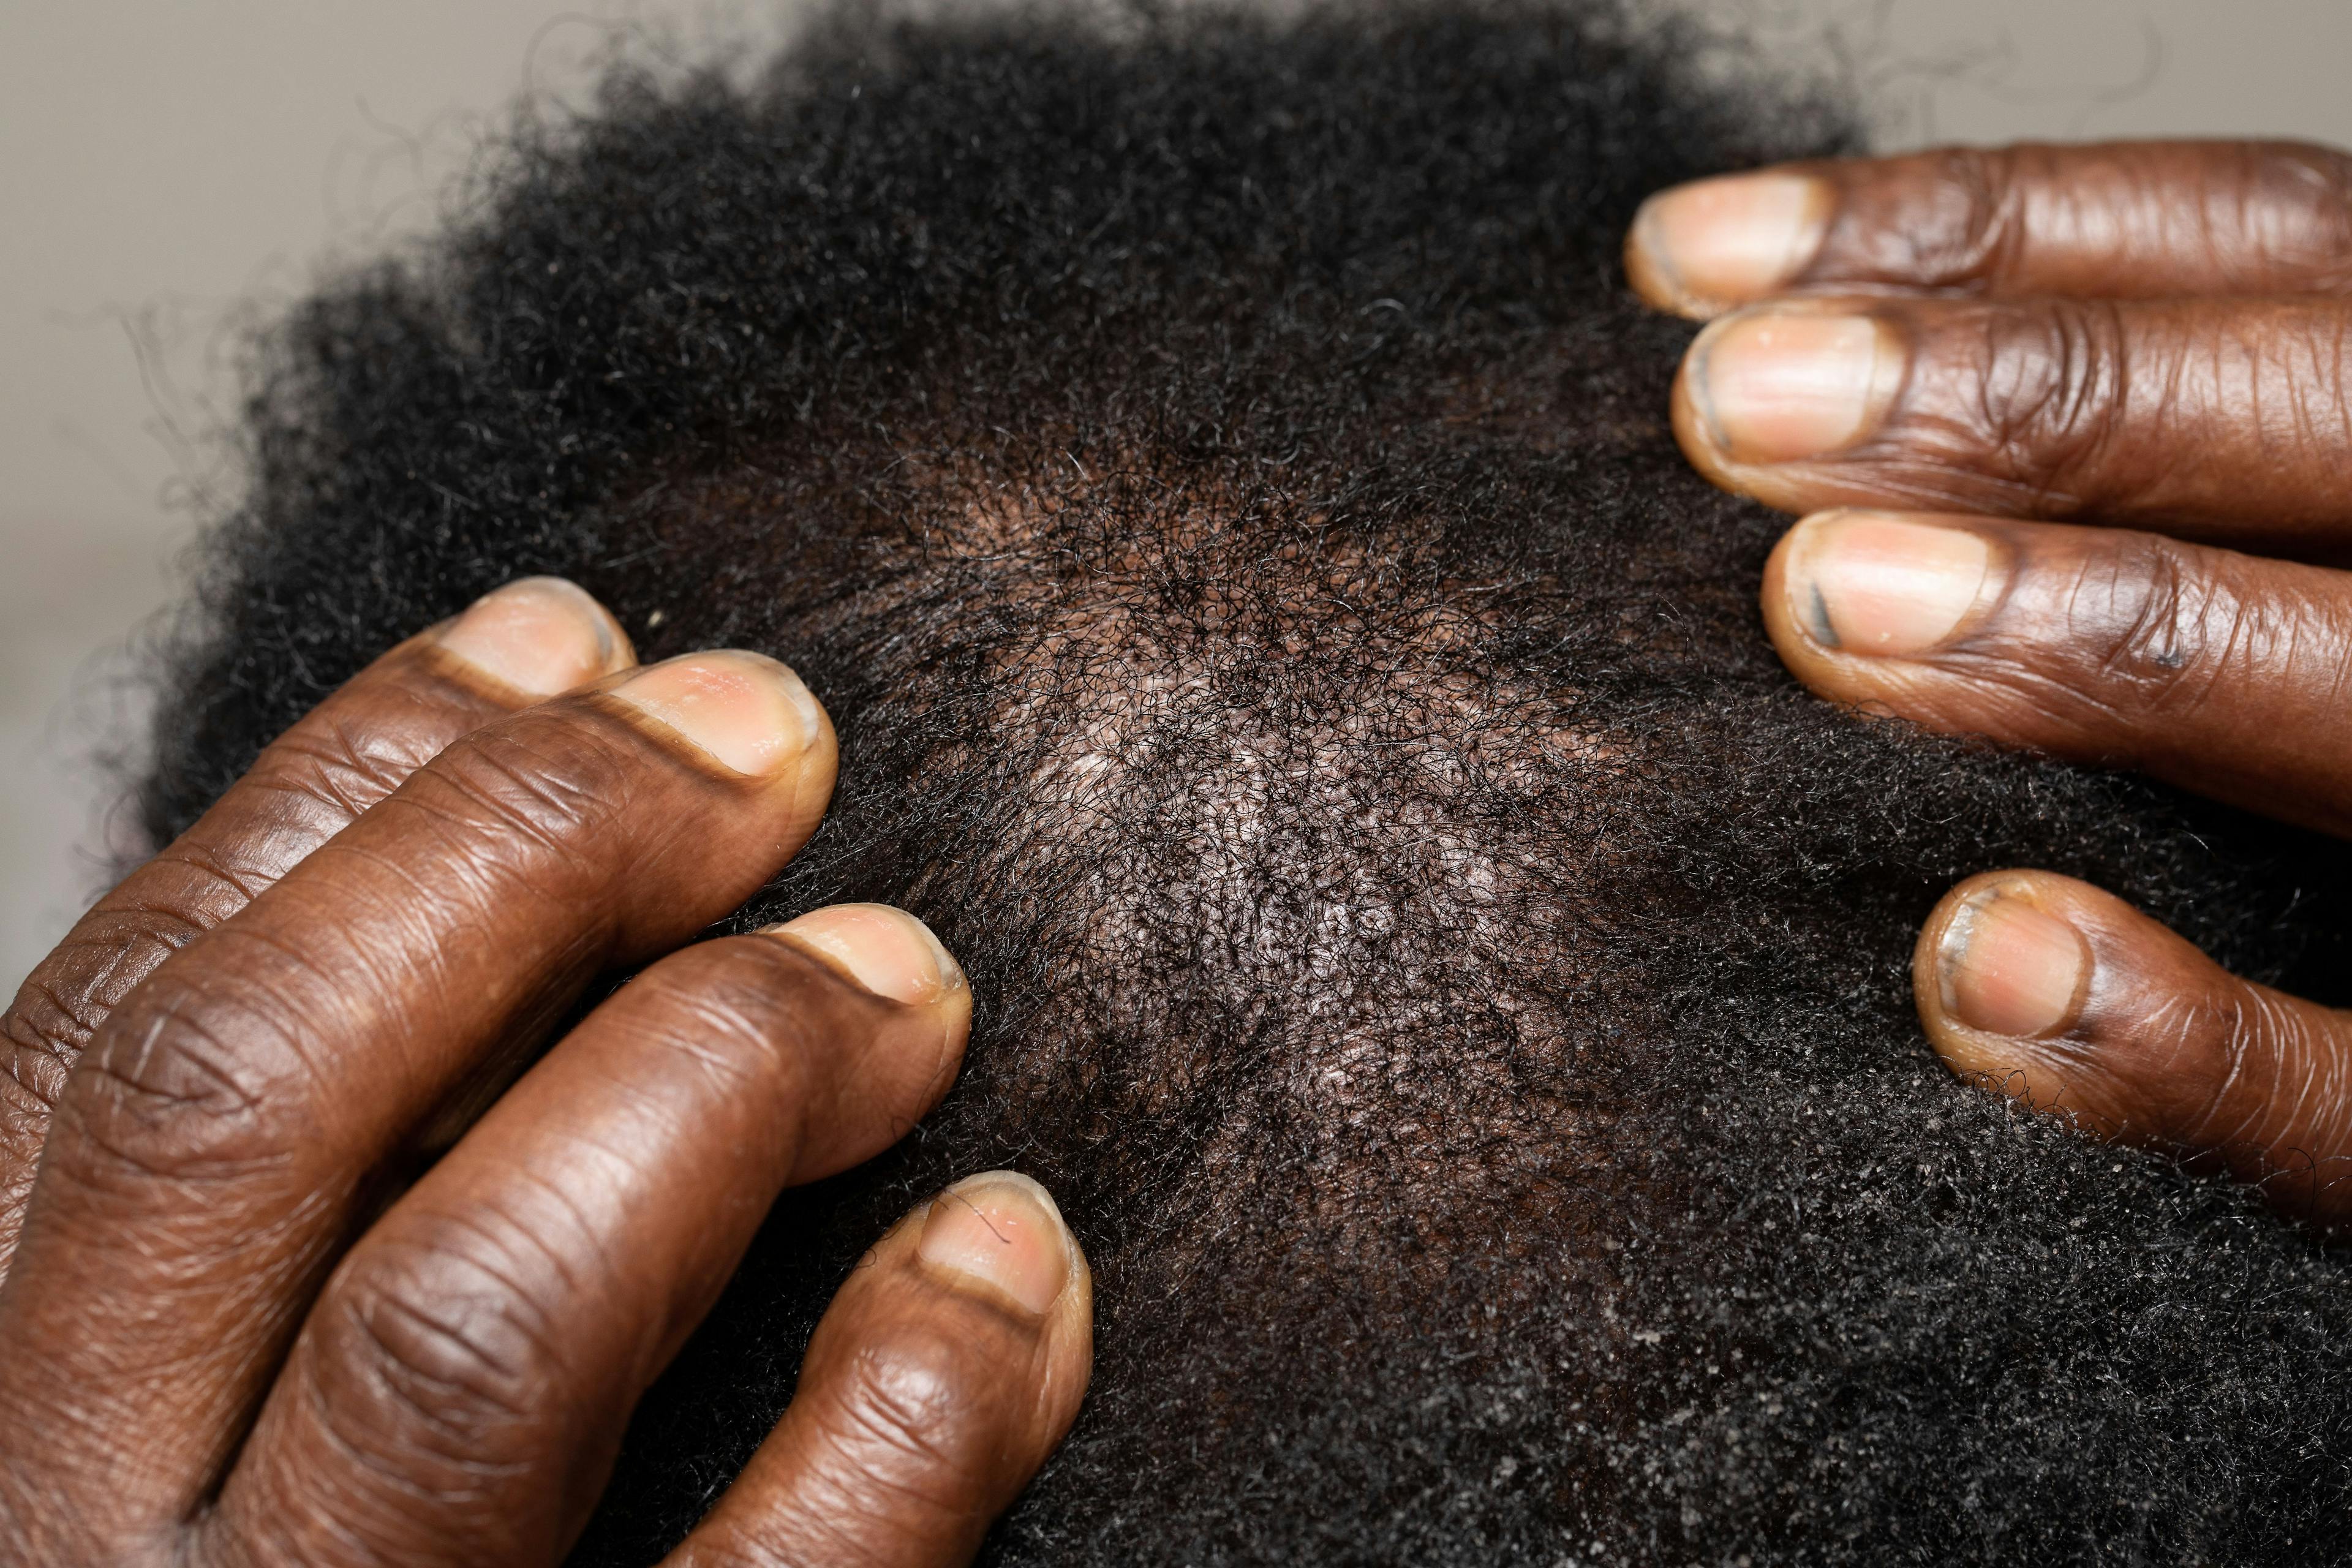 Patient with hair loss on scalp | Image Credit: © Alessandro Grandini - stock.adobe.com